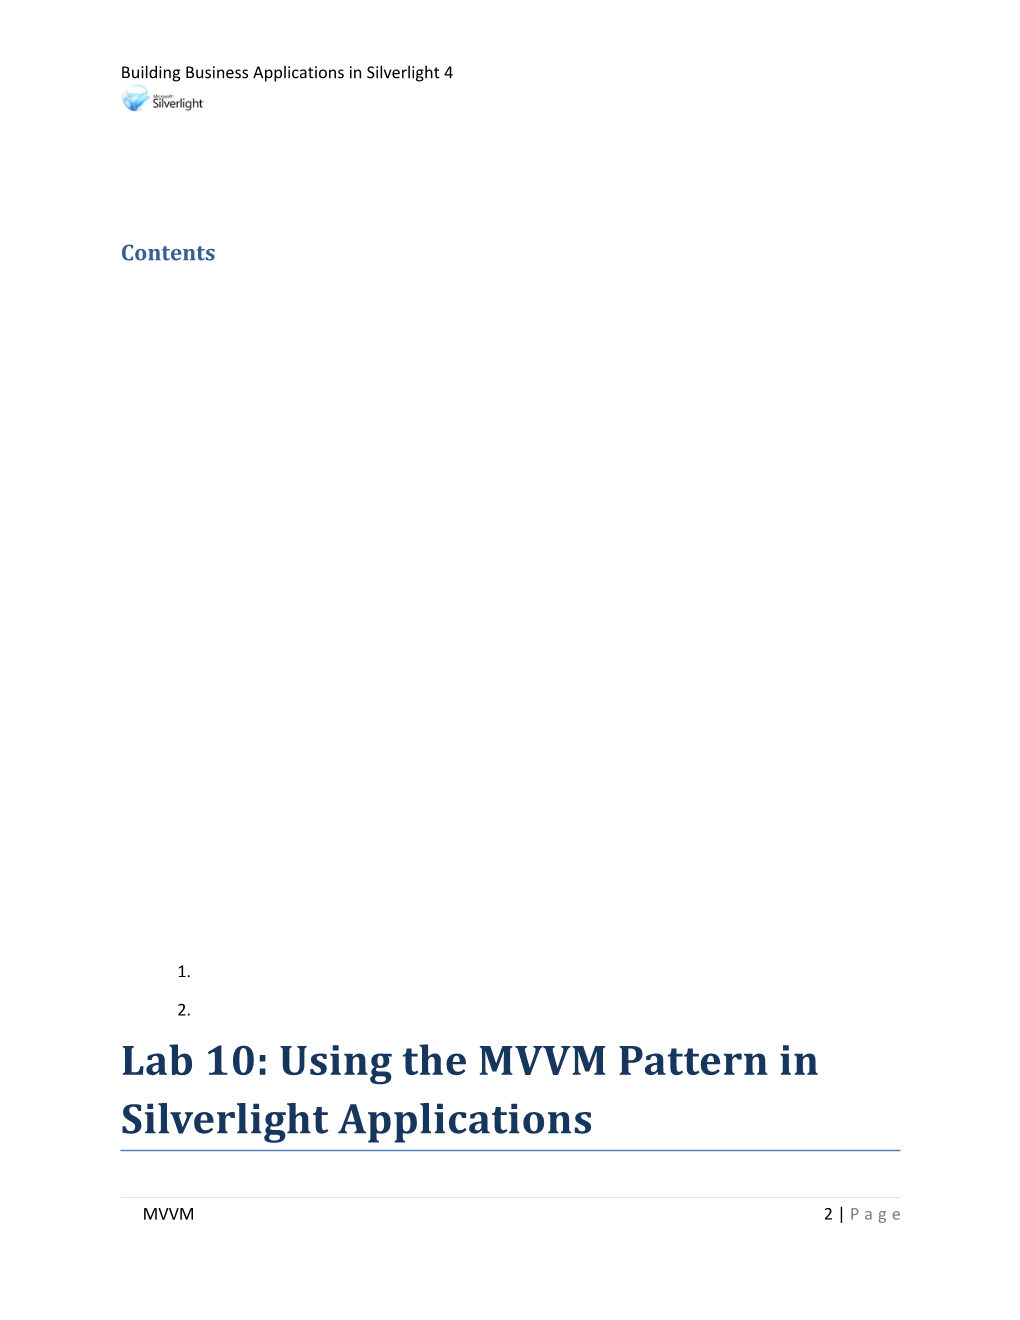 Using the MVVM Pattern in Silverlight Applications s1